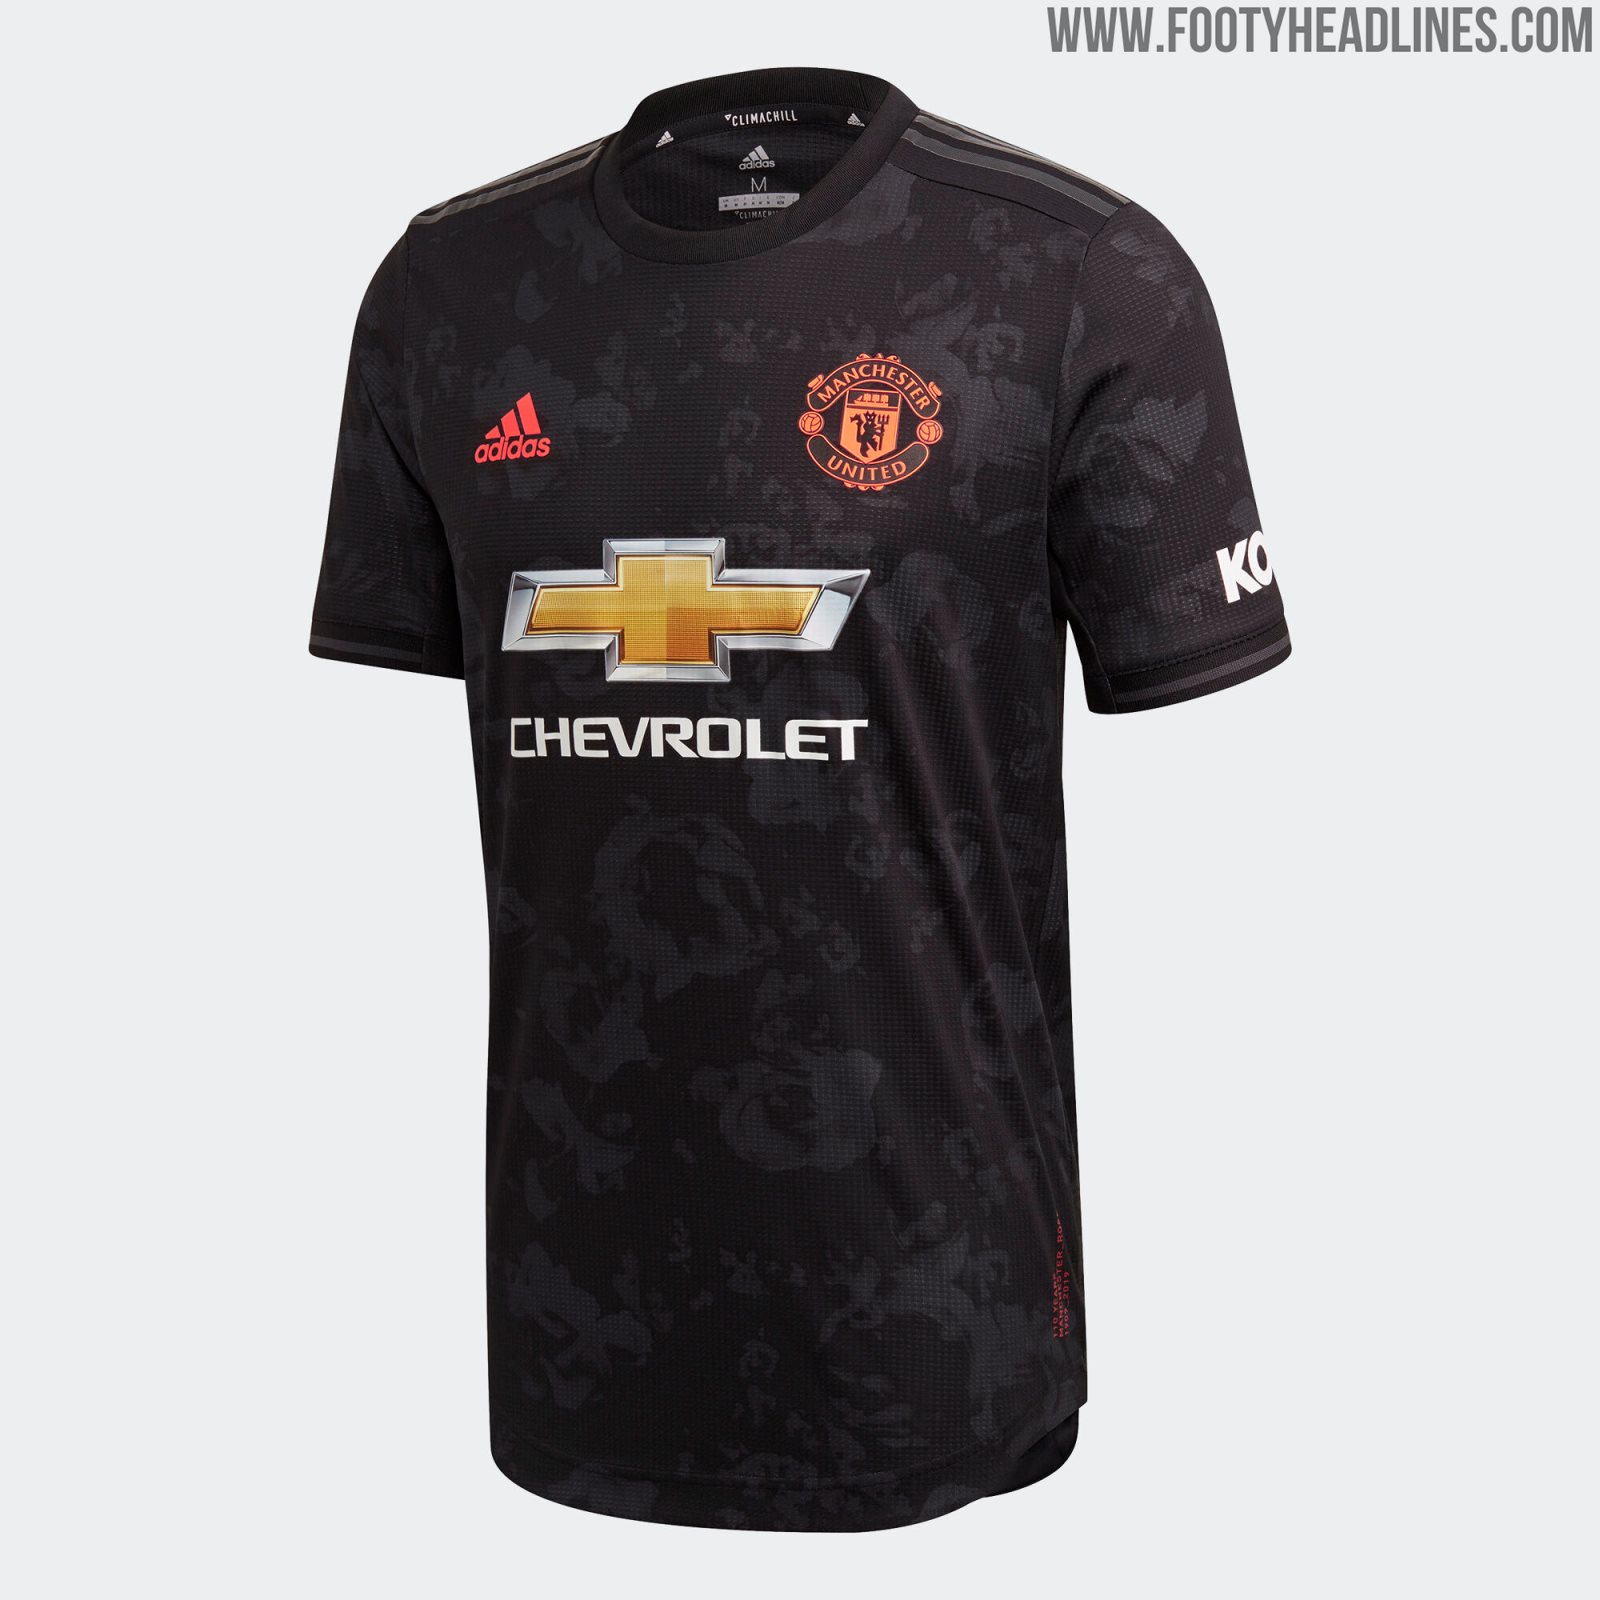 Manchester United 19-20 Third Kit Released - Footy Headlines